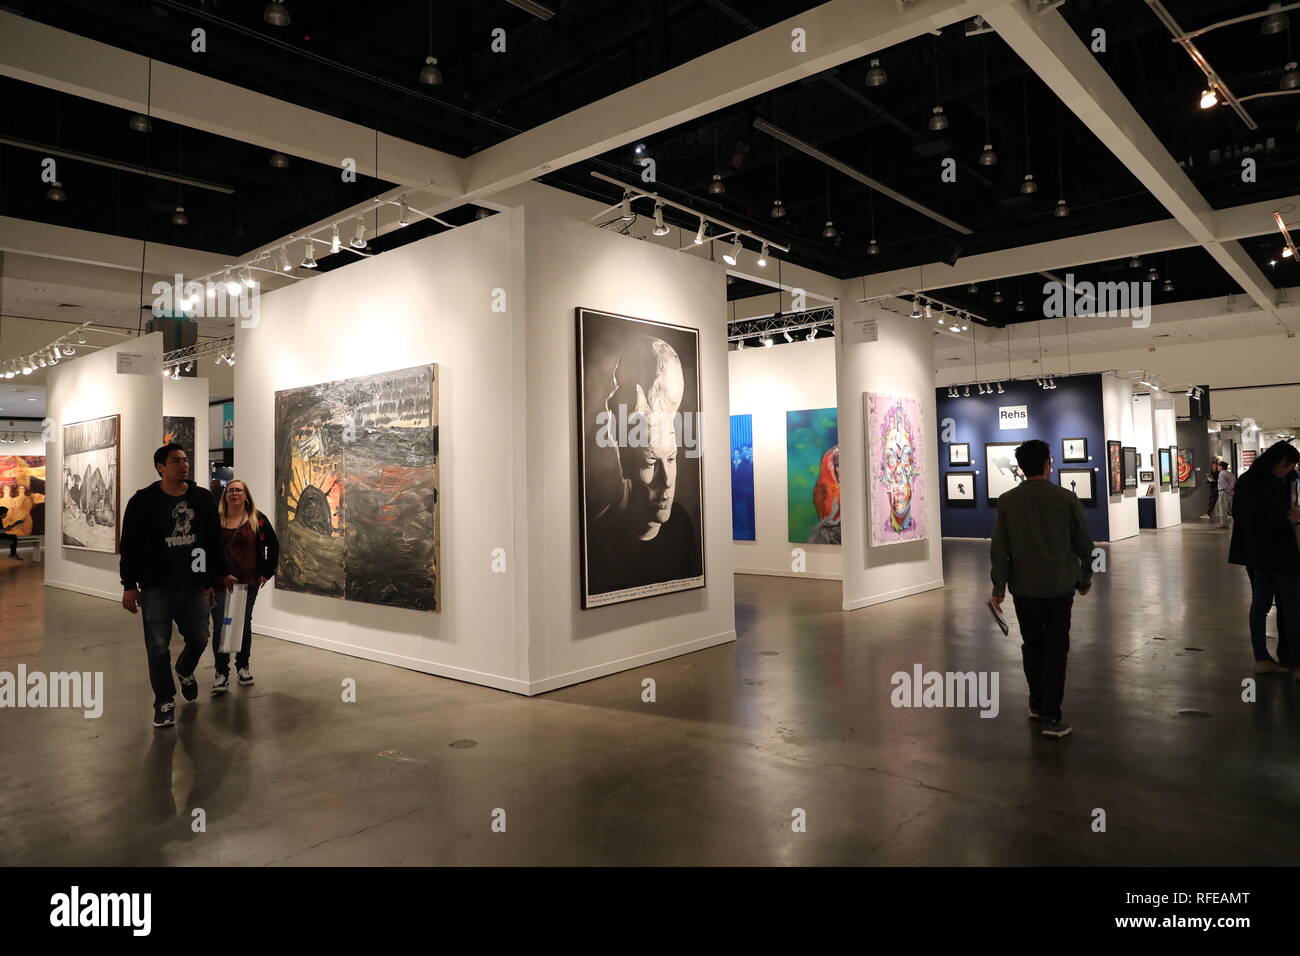 Los Angeles, CA/USA - 1/24/2019: The LA Art Show at Los Angeles Convention Center which is the The Most Comprehensive International Contemporary Art S Stock Photo